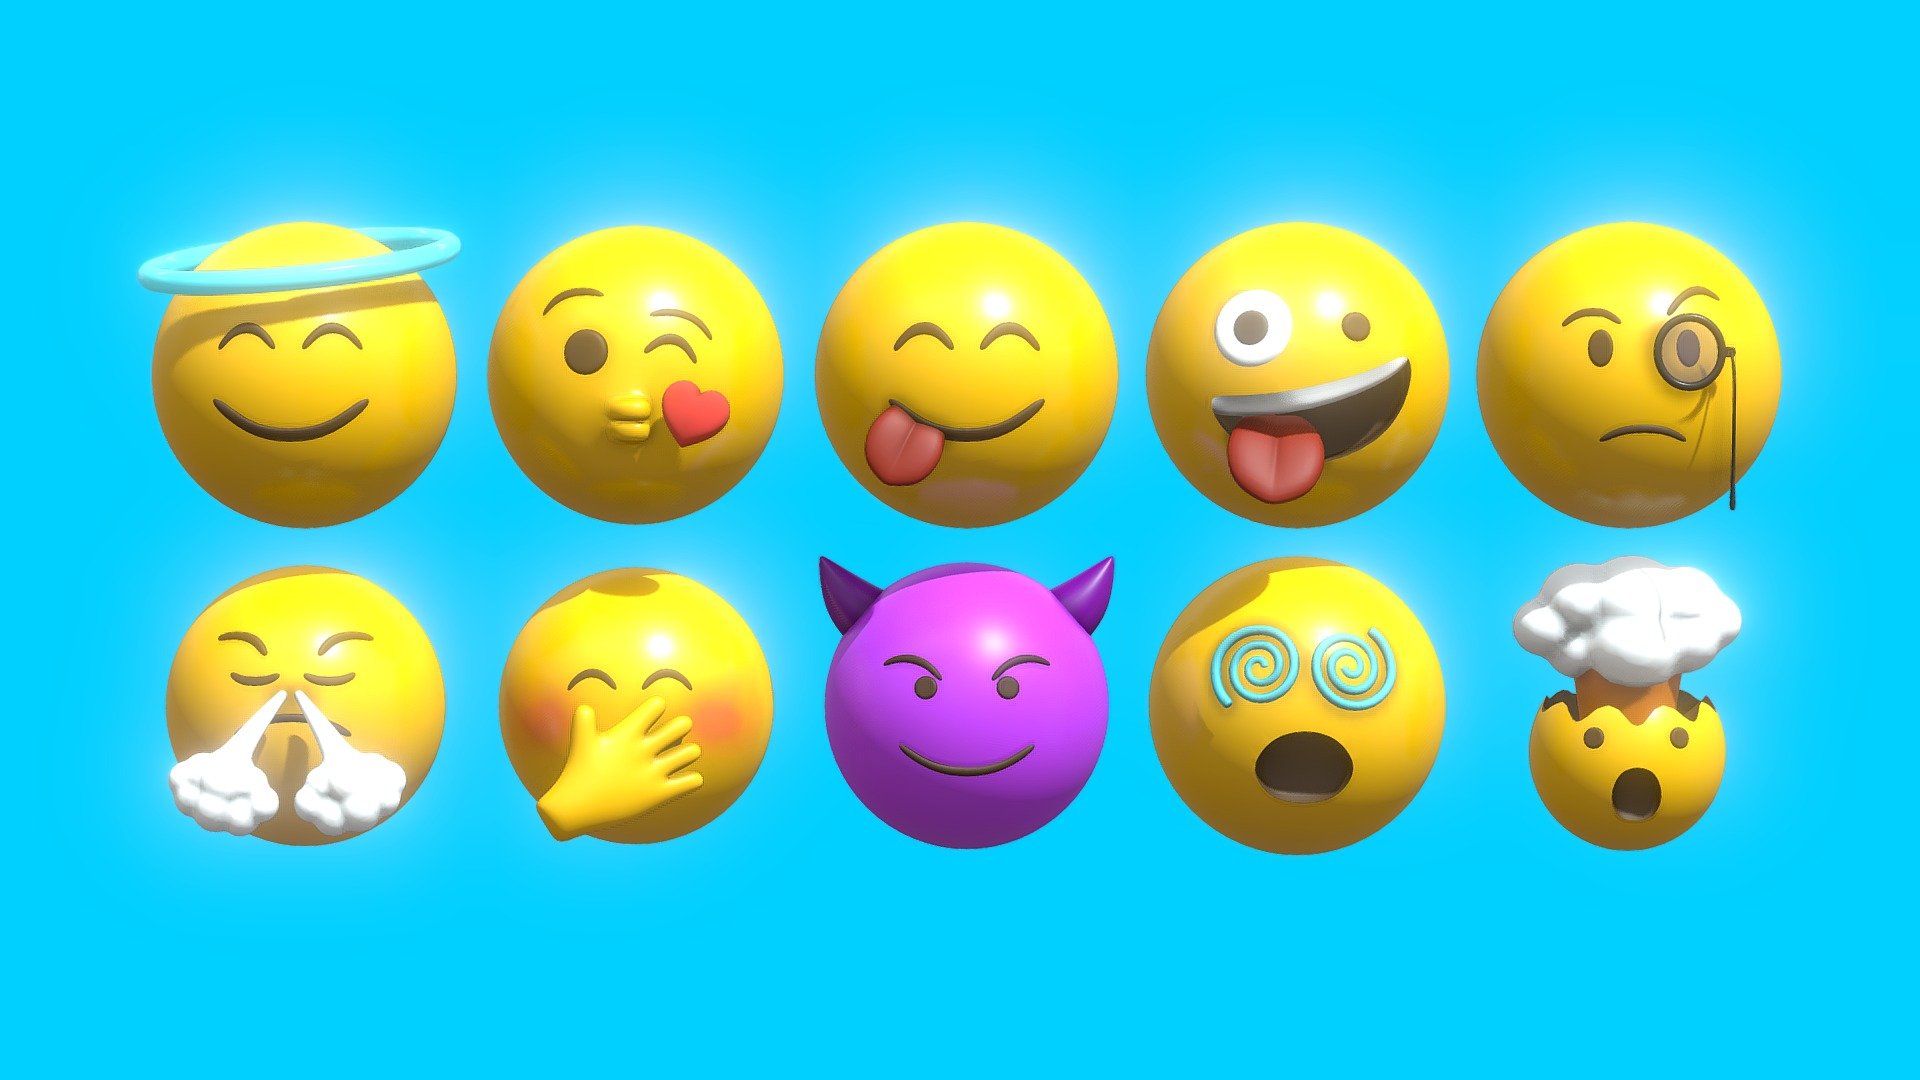 3D 10 Emoticon Yellow Ball Pack Part 3 Made in Blender 3.5

Emoticon List :




Smile Angelic Halo

Blow a Kiss

Yummy Facce

Silly Face

Gentleman with Monocle

Frustrated Steam

Hiding Smile or Shy

Evil Purple

Dizzy with Spiral Eyes

Exploded Head or Stress

For TEXTURE include the DIFFUSE AND ROUGHNESS, but if want to tweak the color it’s just using the principled bsdf in the blender file

each Emoticon exported to an FBX, OBJ, DAE, GLB/GLTF and STL format

in the blender file i just included the lighting setting for rendering just like the preview image - 10 Emoticon Yellow Ball Pack Part 3 - Buy Royalty Free 3D model by pakyucangkun 3d model